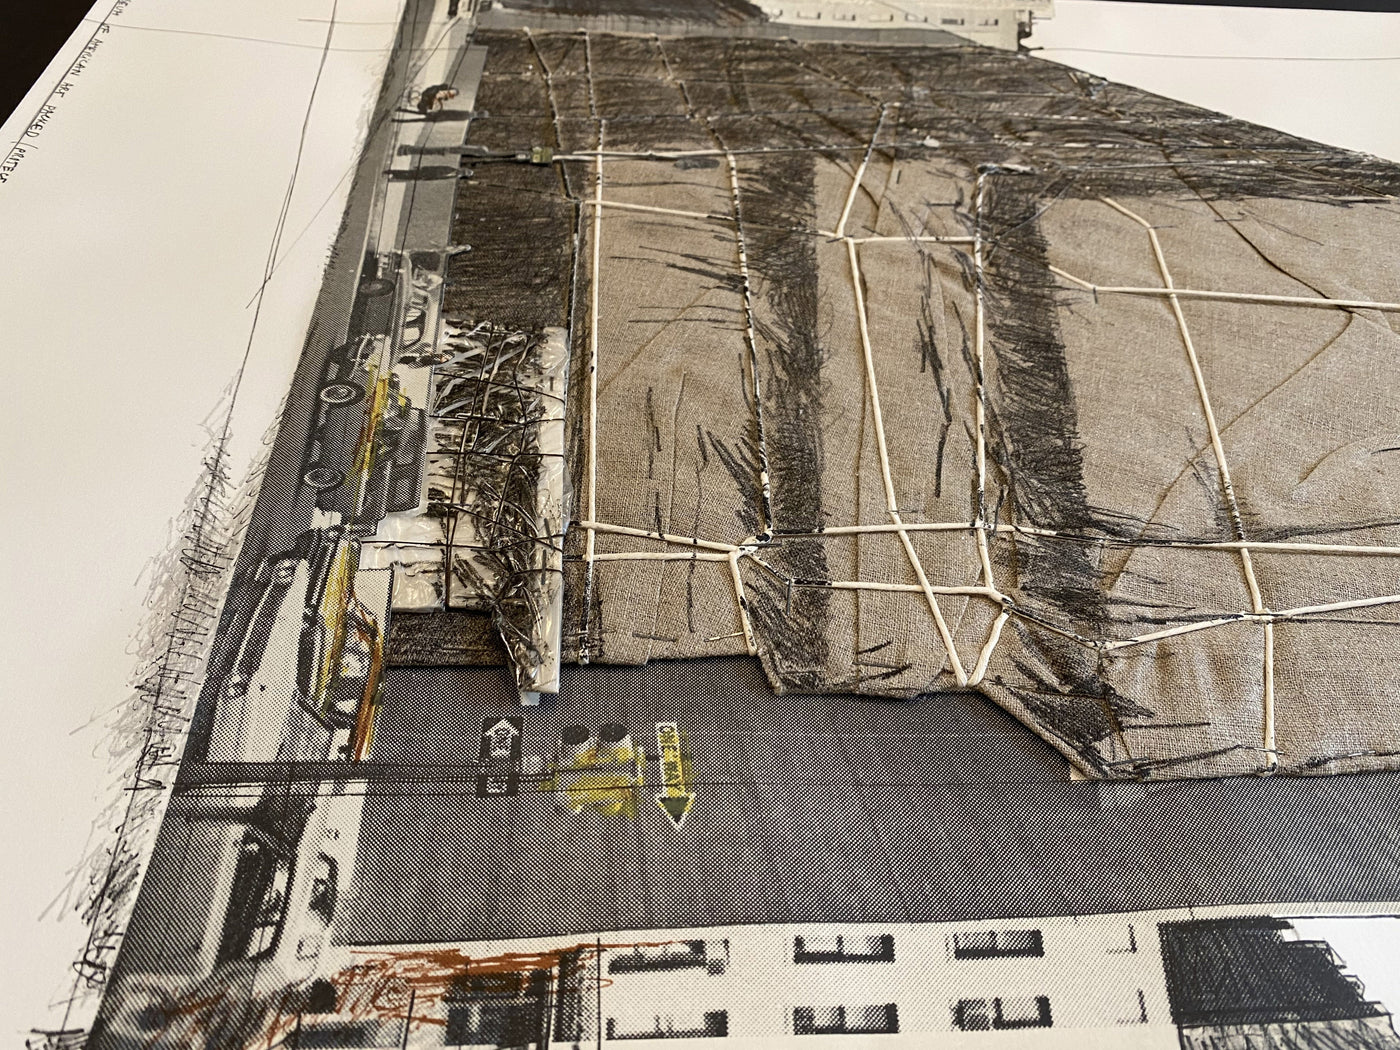 Christo Whitney Museum of American Art, Packed, Project for New York (Schellman and Benecke 35) 1971